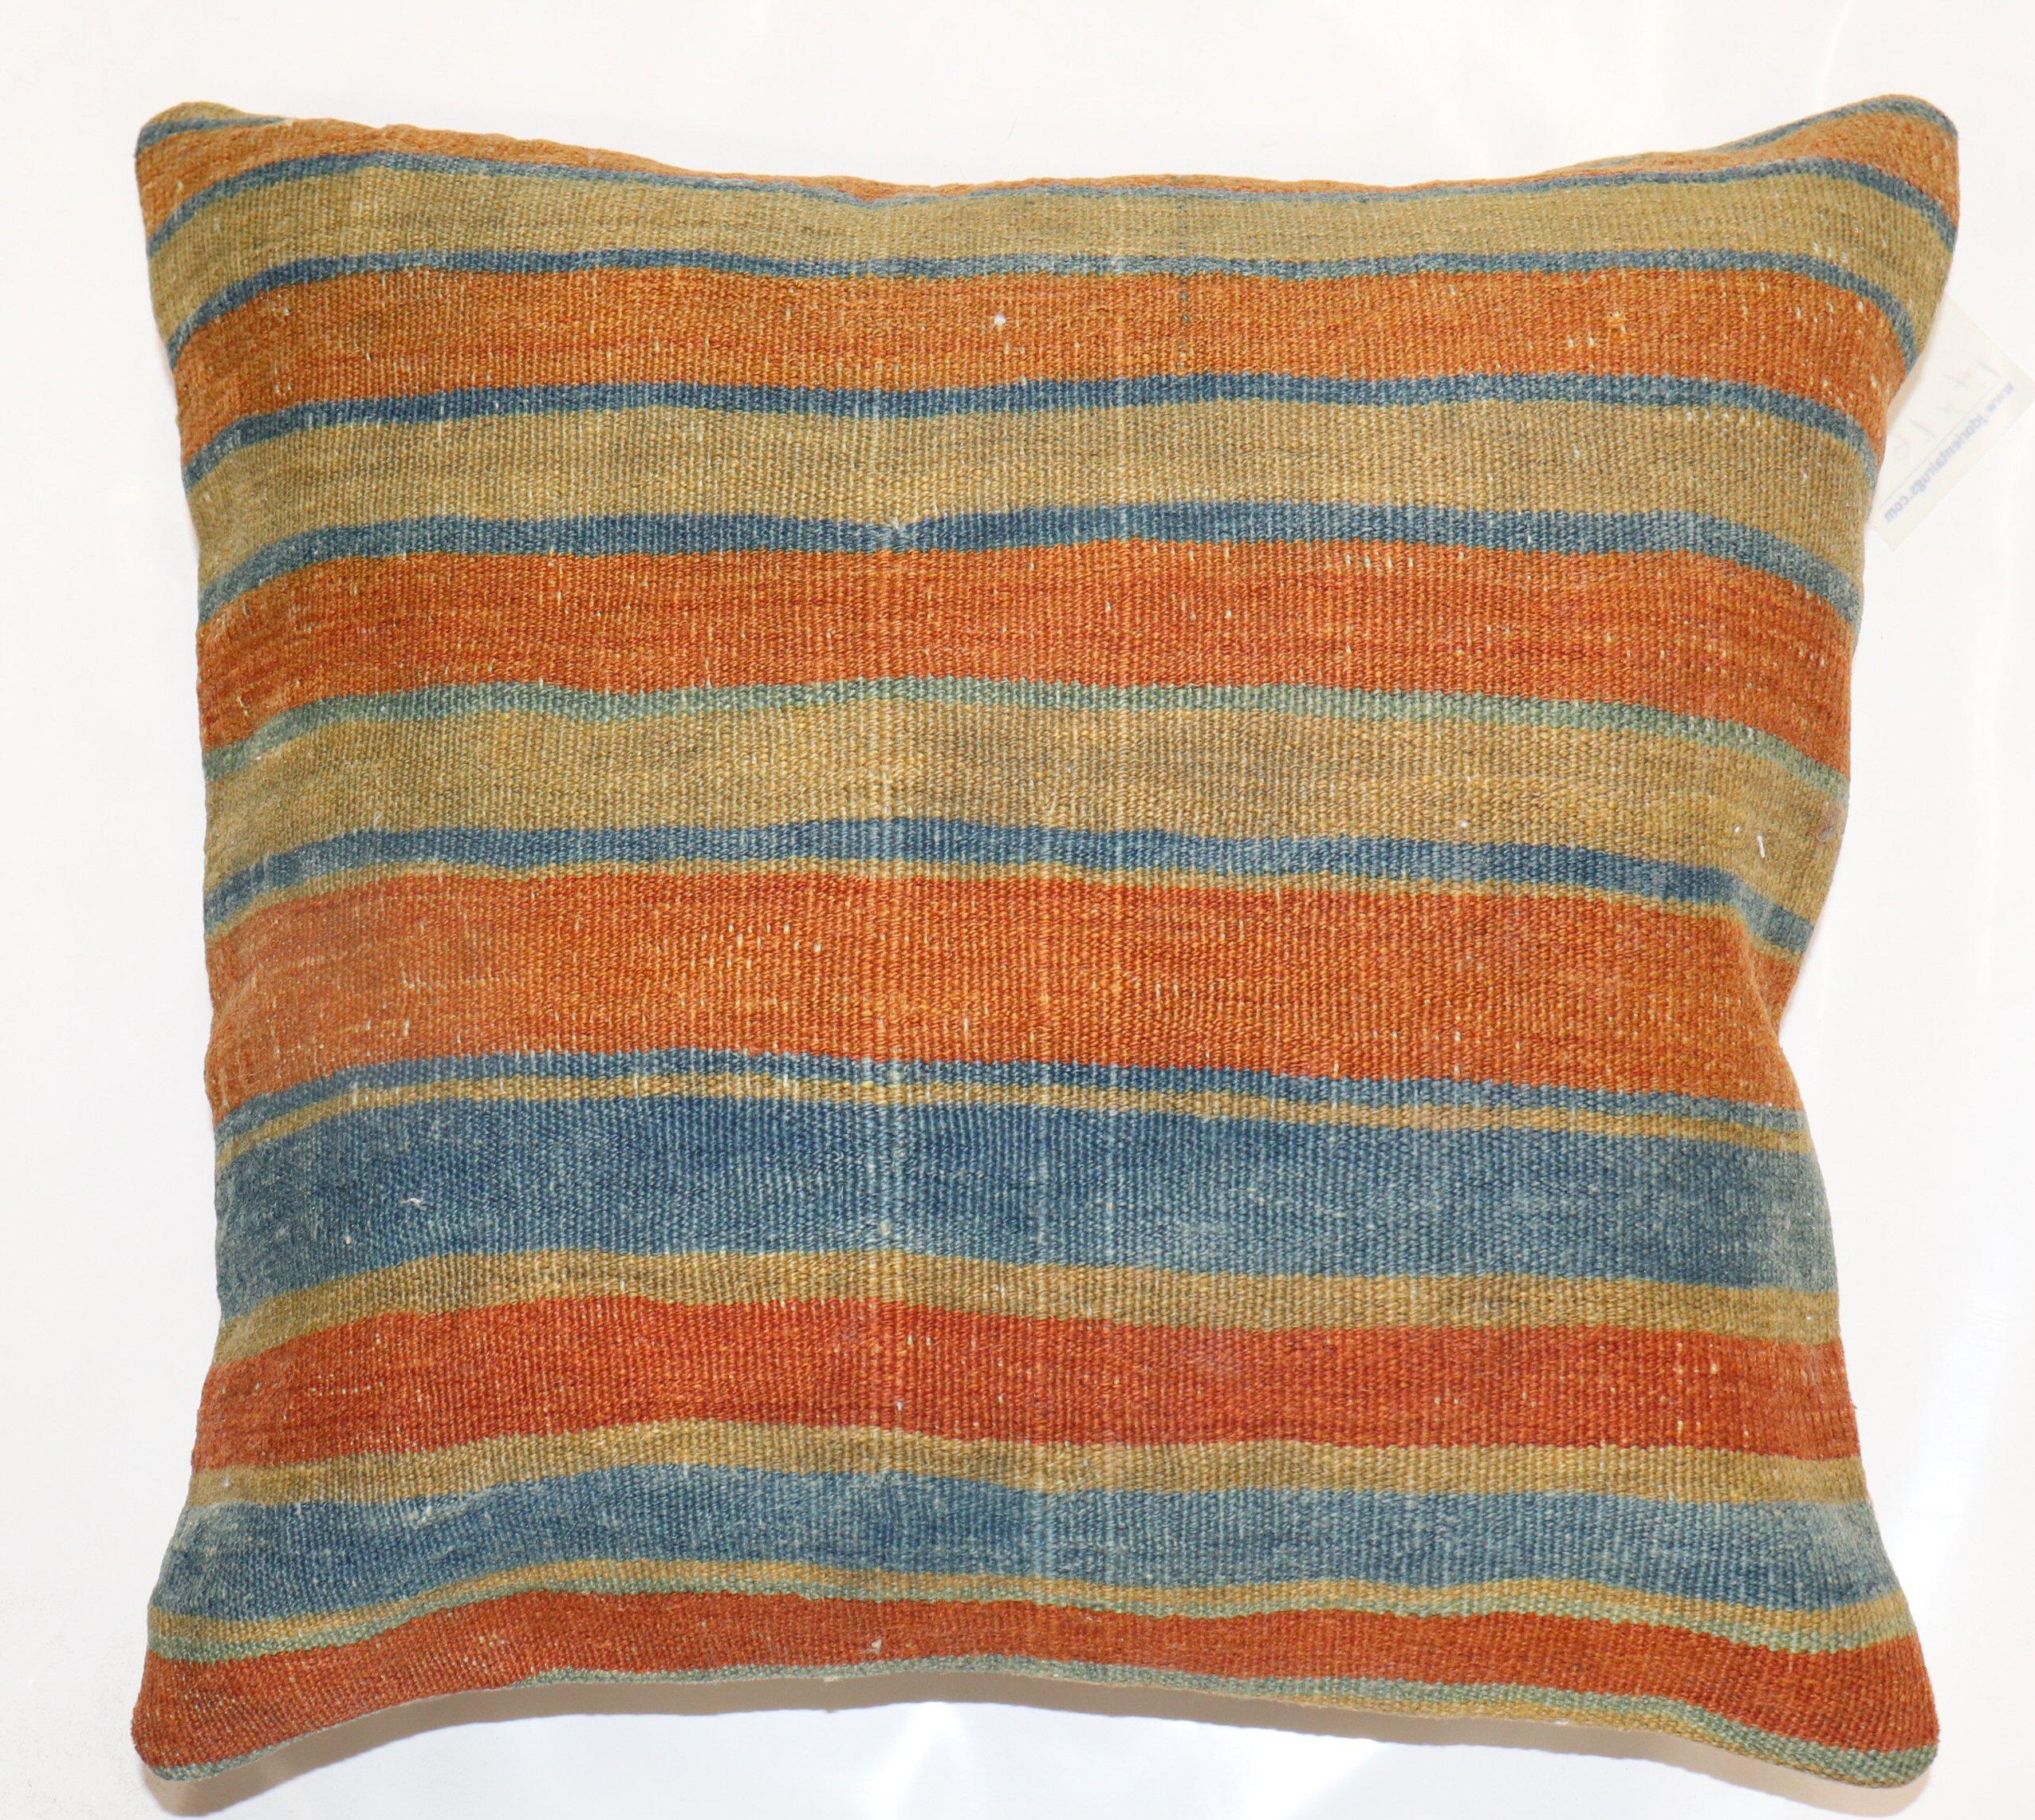 Pillow made from a vintage Turkish Kilim with cotton back. Zipper closure and foam insert provided. 

Measures: 16'' x 18''.